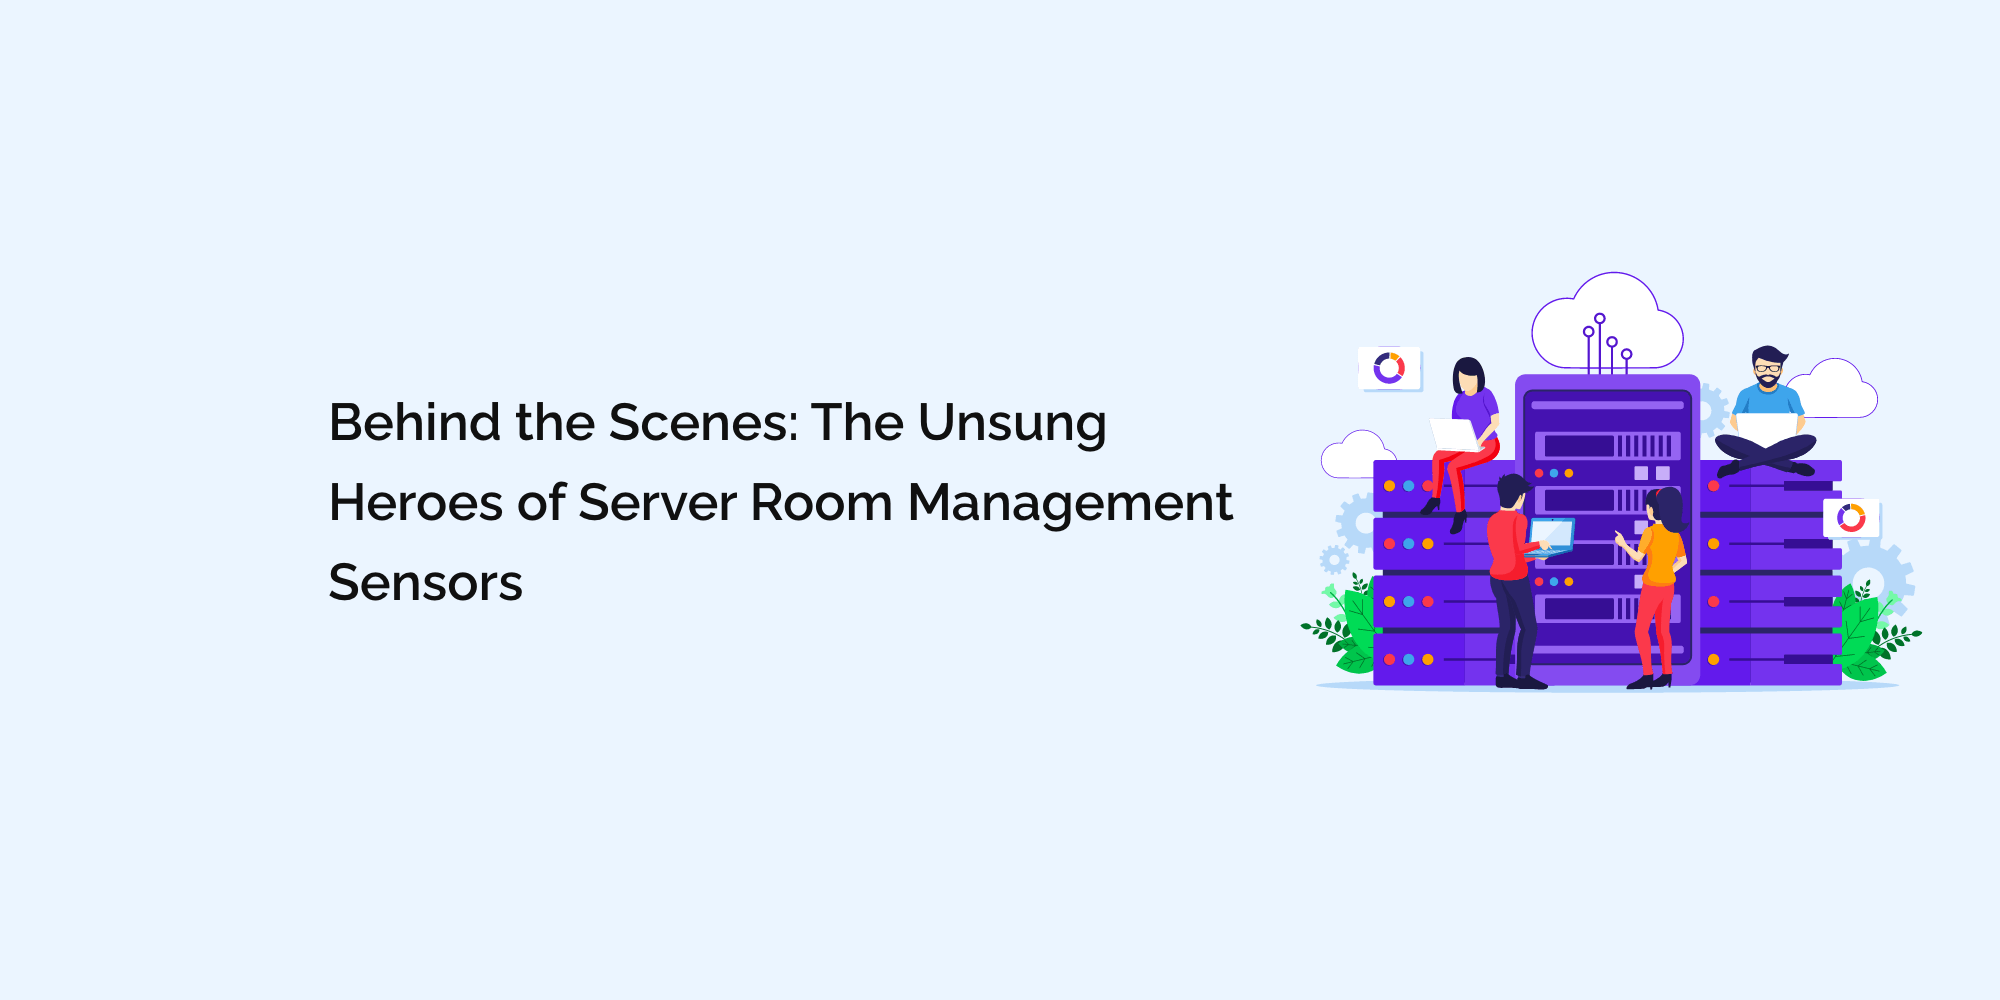 Behind the Scenes: The Unsung Heroes of Server Room Management - Sensors